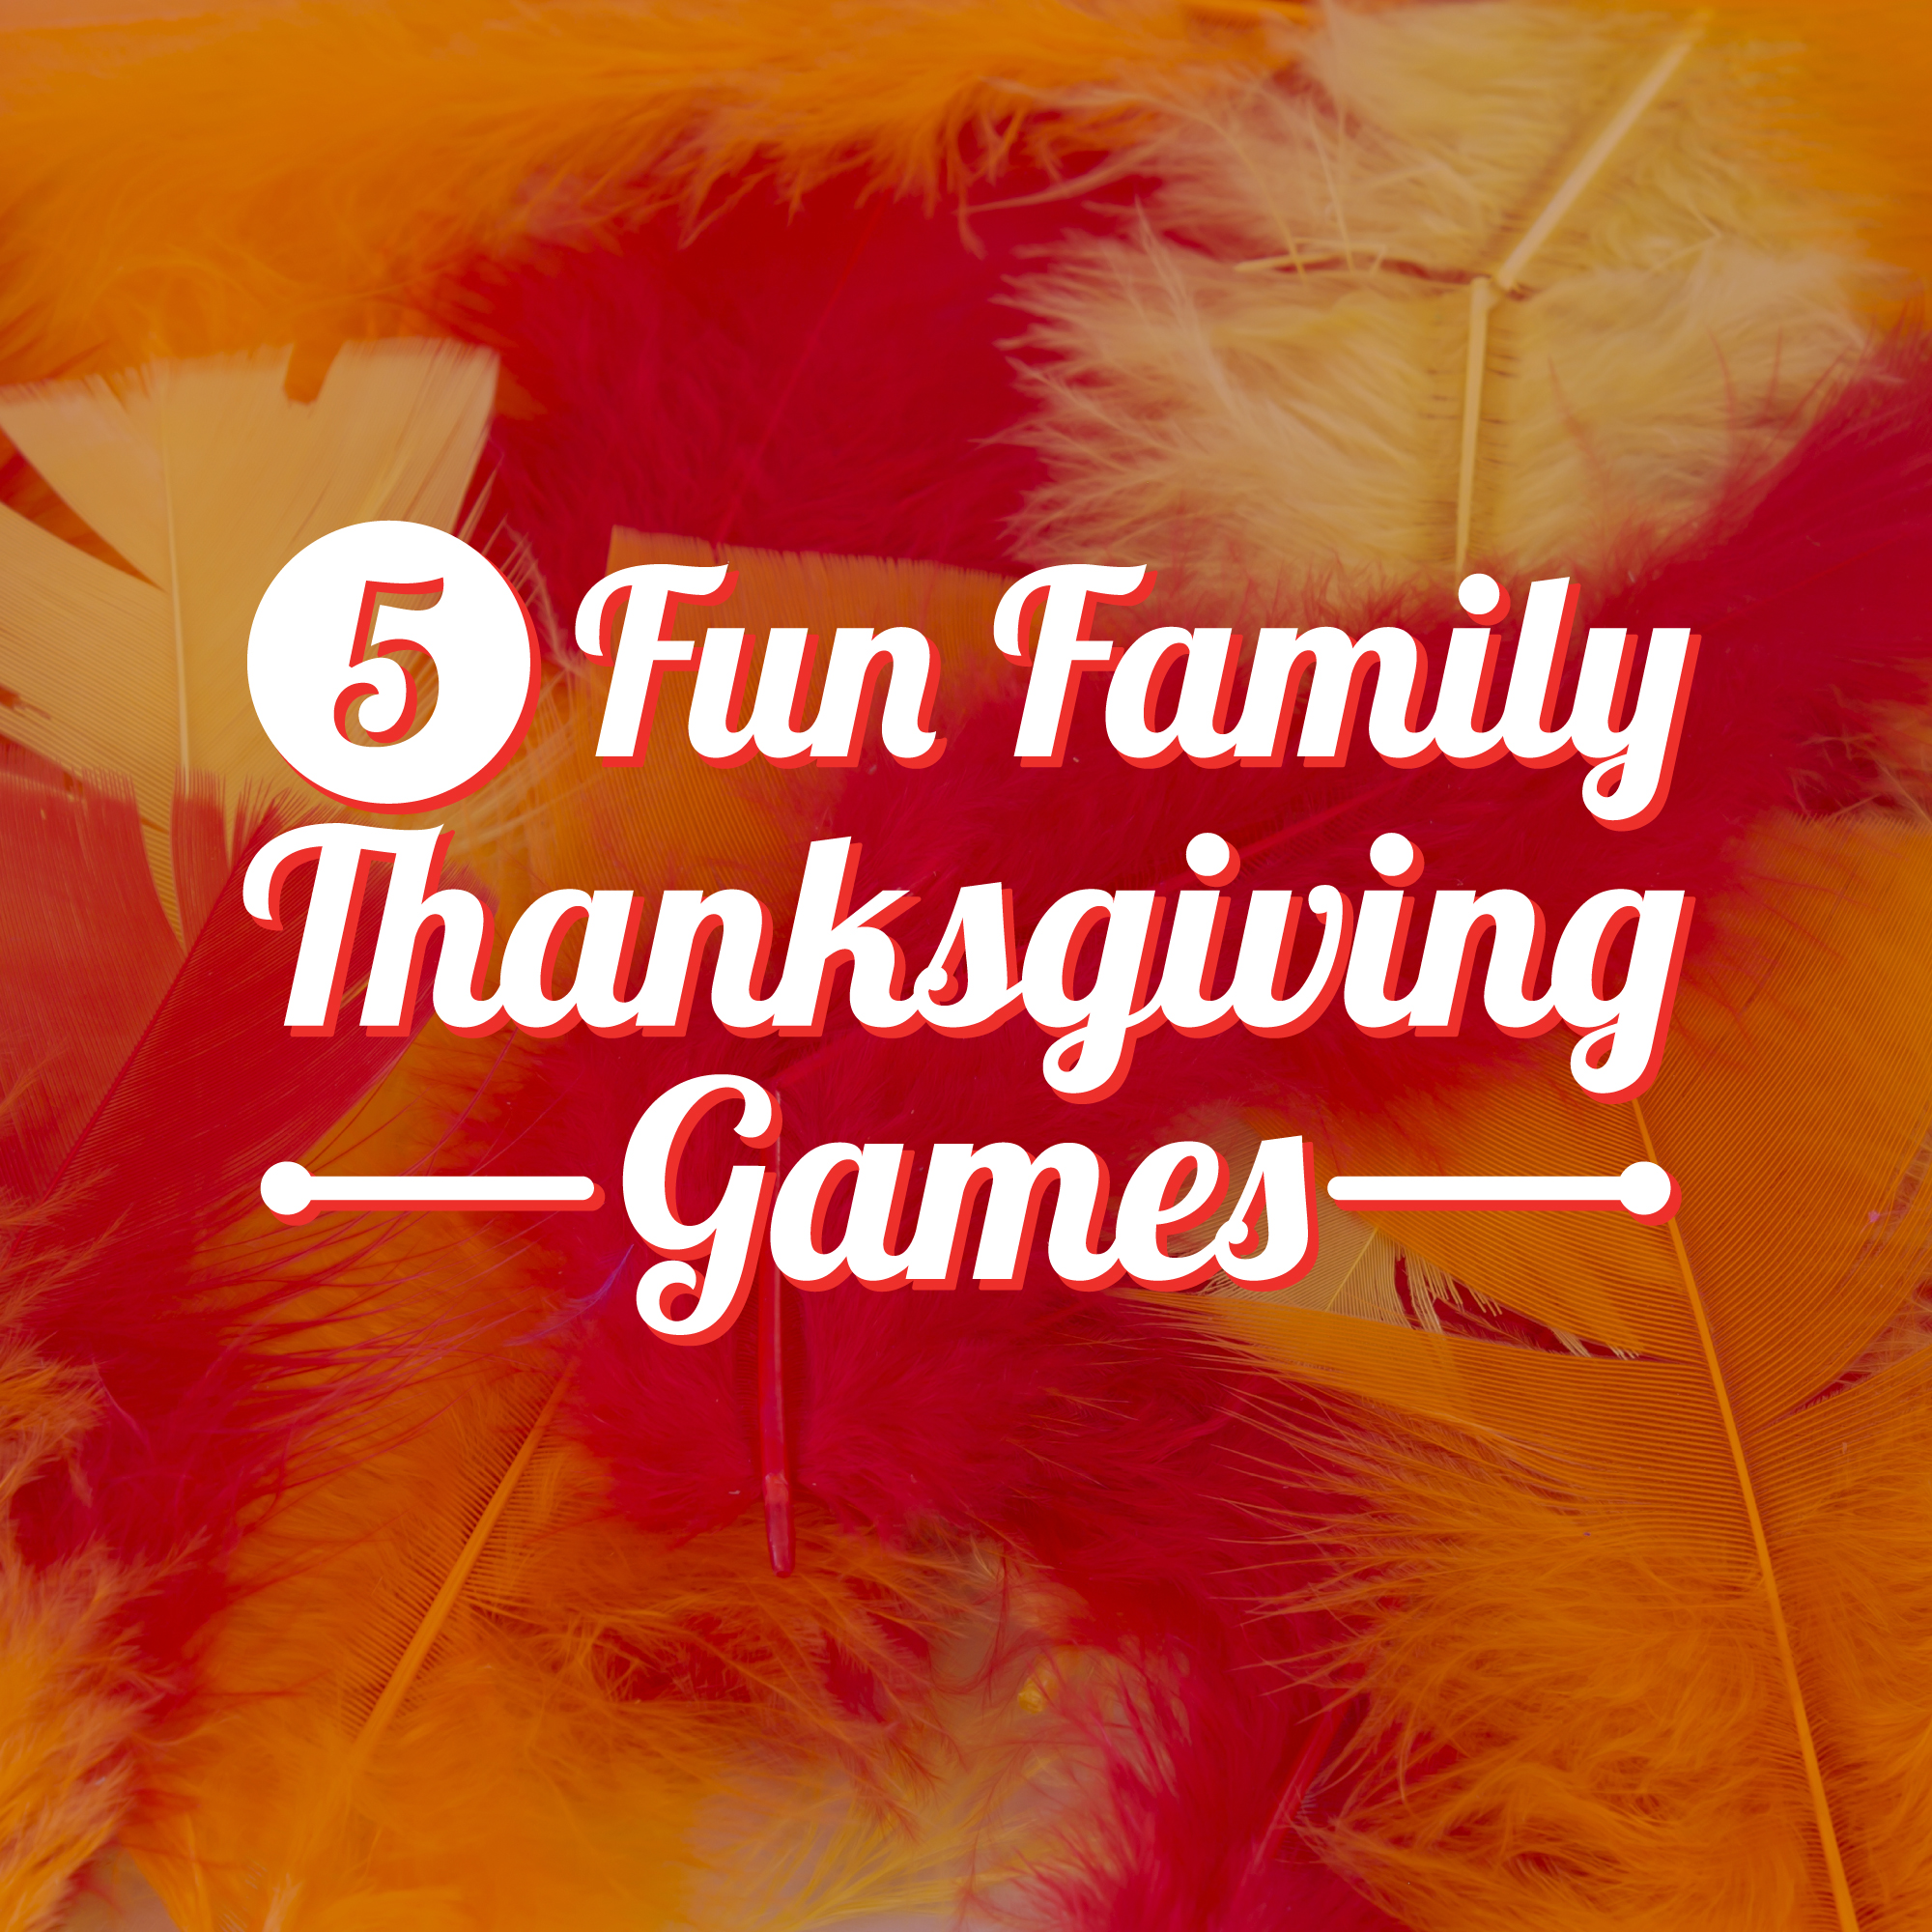 5-fun-family-thanksgiving-games-country-home-learning-center